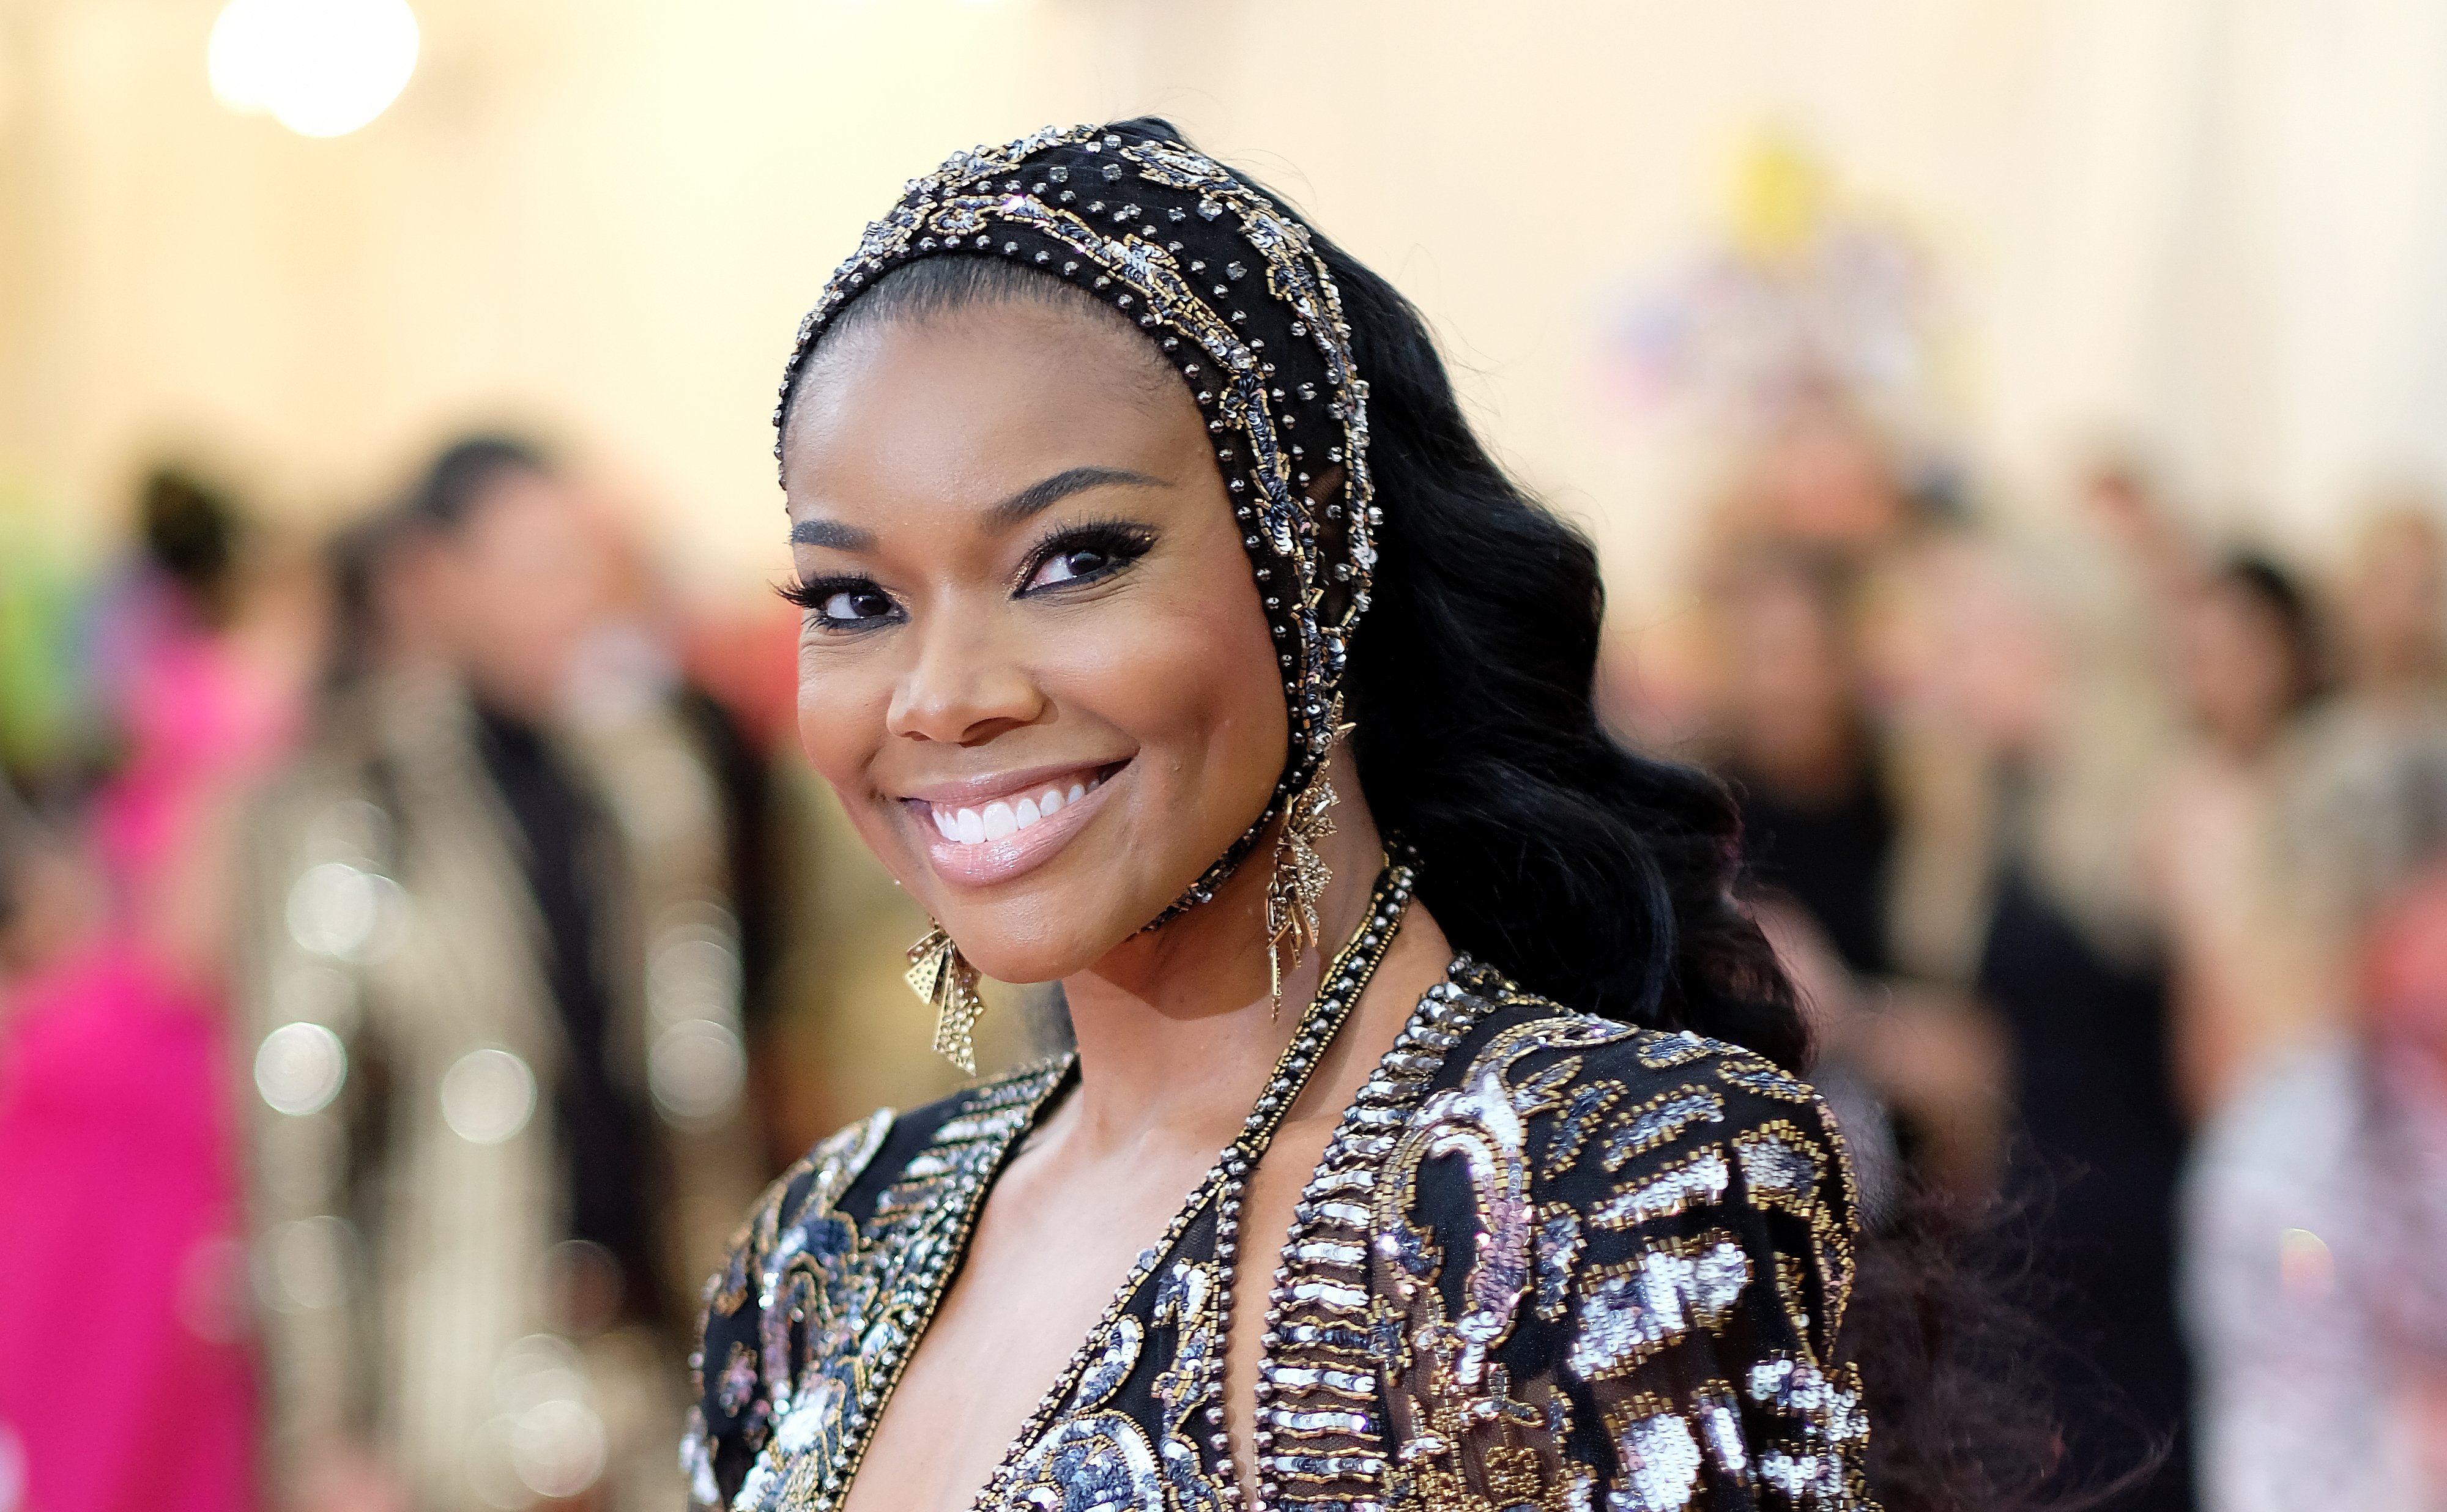 Gabrielle Union at the 2019 Met Gala at the Metropolitan Museum of Art on May 06, 2019 | Photo: Getty Images